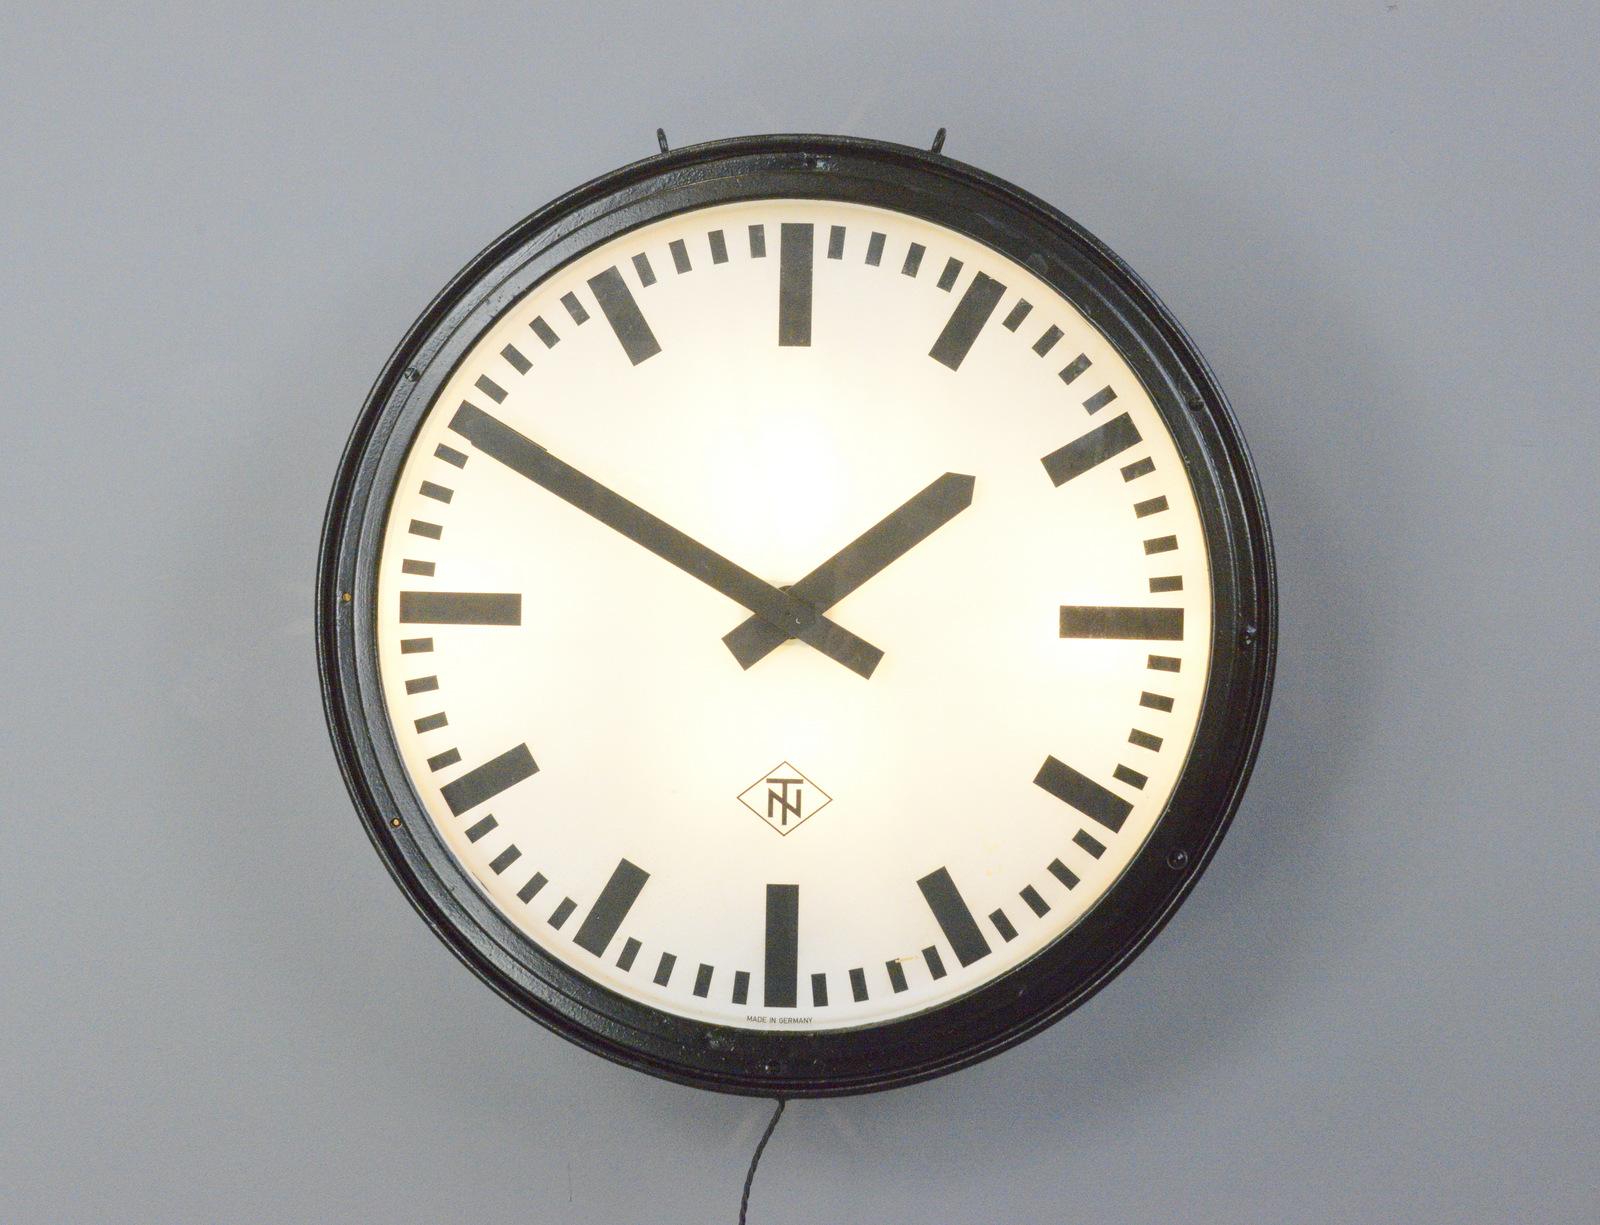 Large light up factory clock by TN, Circa 1950s

- Steel casing
- Glass face and dial
- Takes 3x E27 fitting bulbs
- New AA battery powered quartz motor
- Remote control switch for the lights
- Made by Tele Norma
- German ~ 1950s
- 72cm